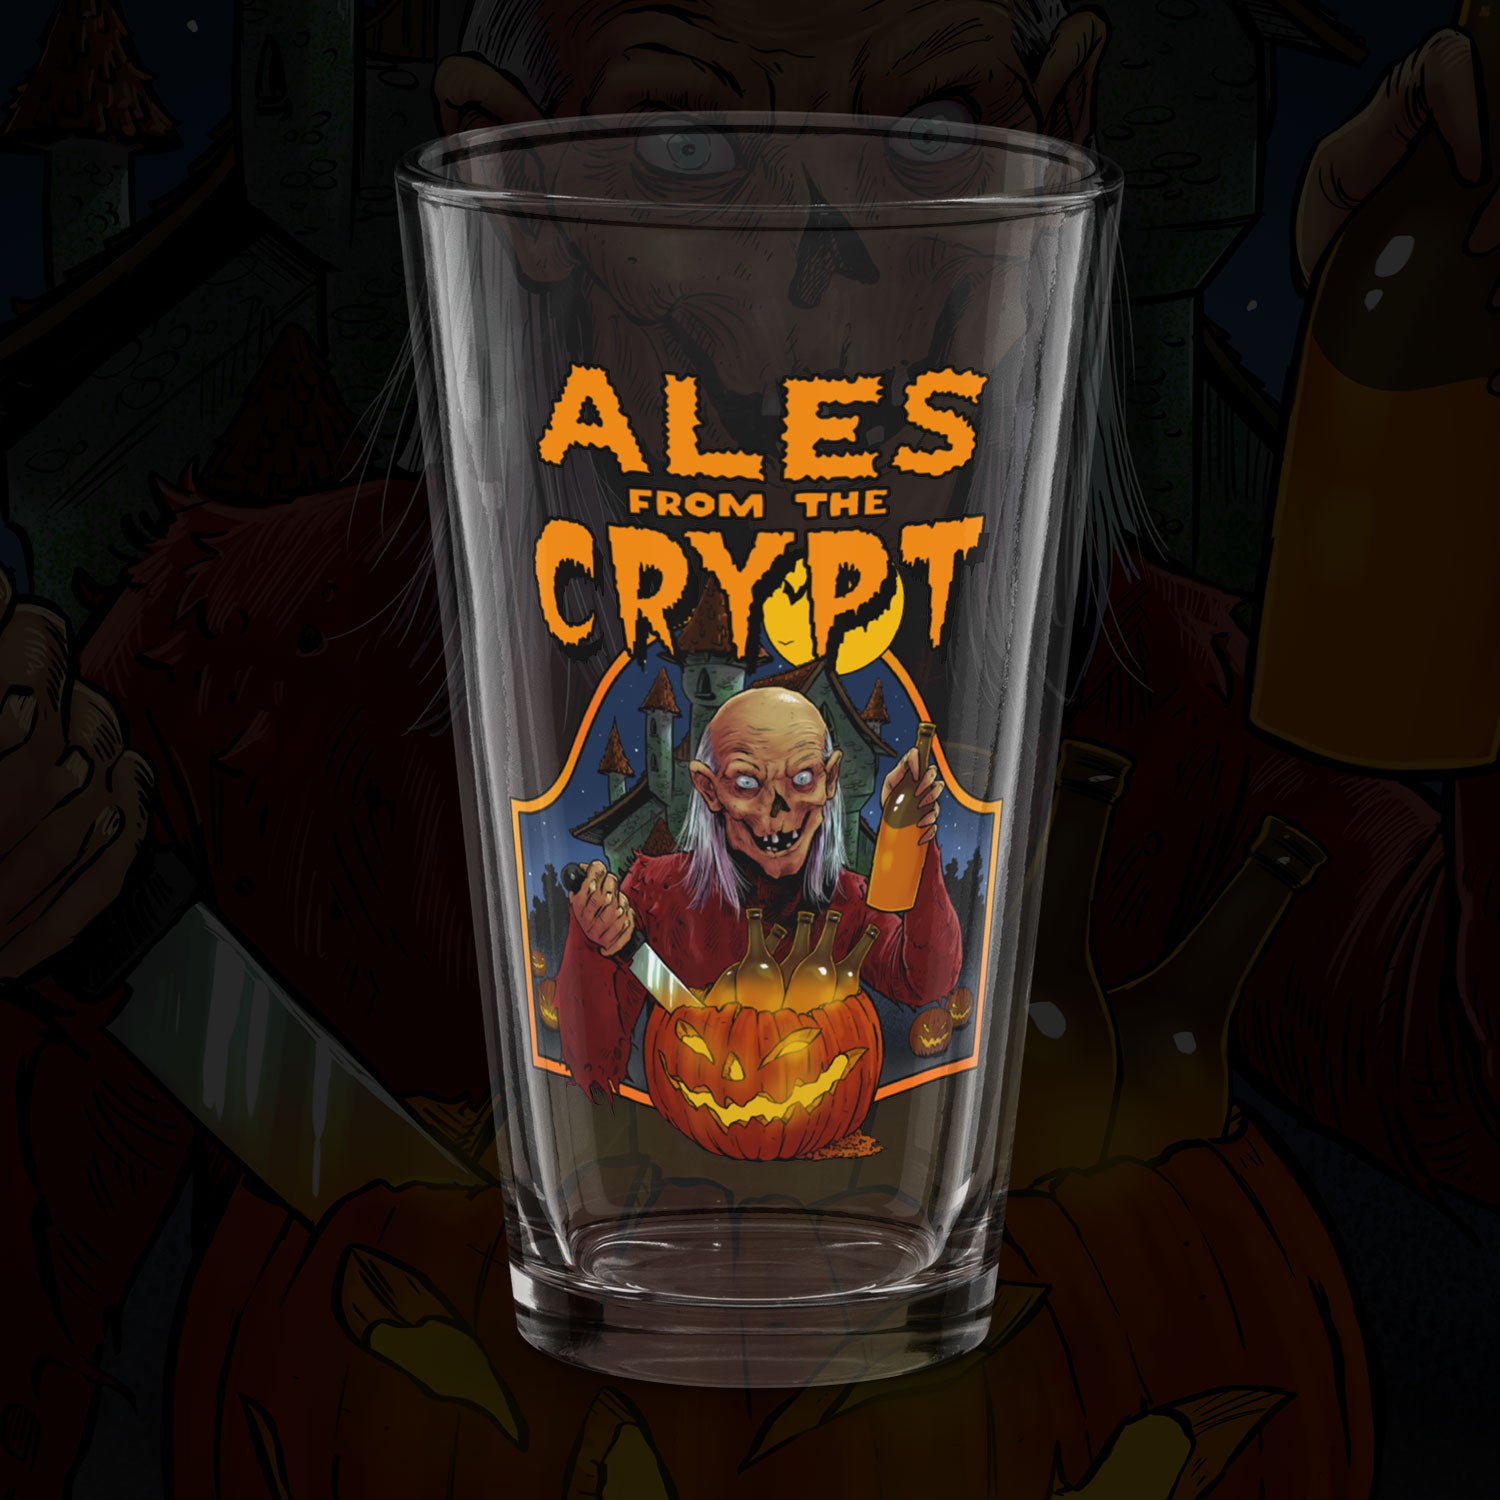 Ales From the Crypt